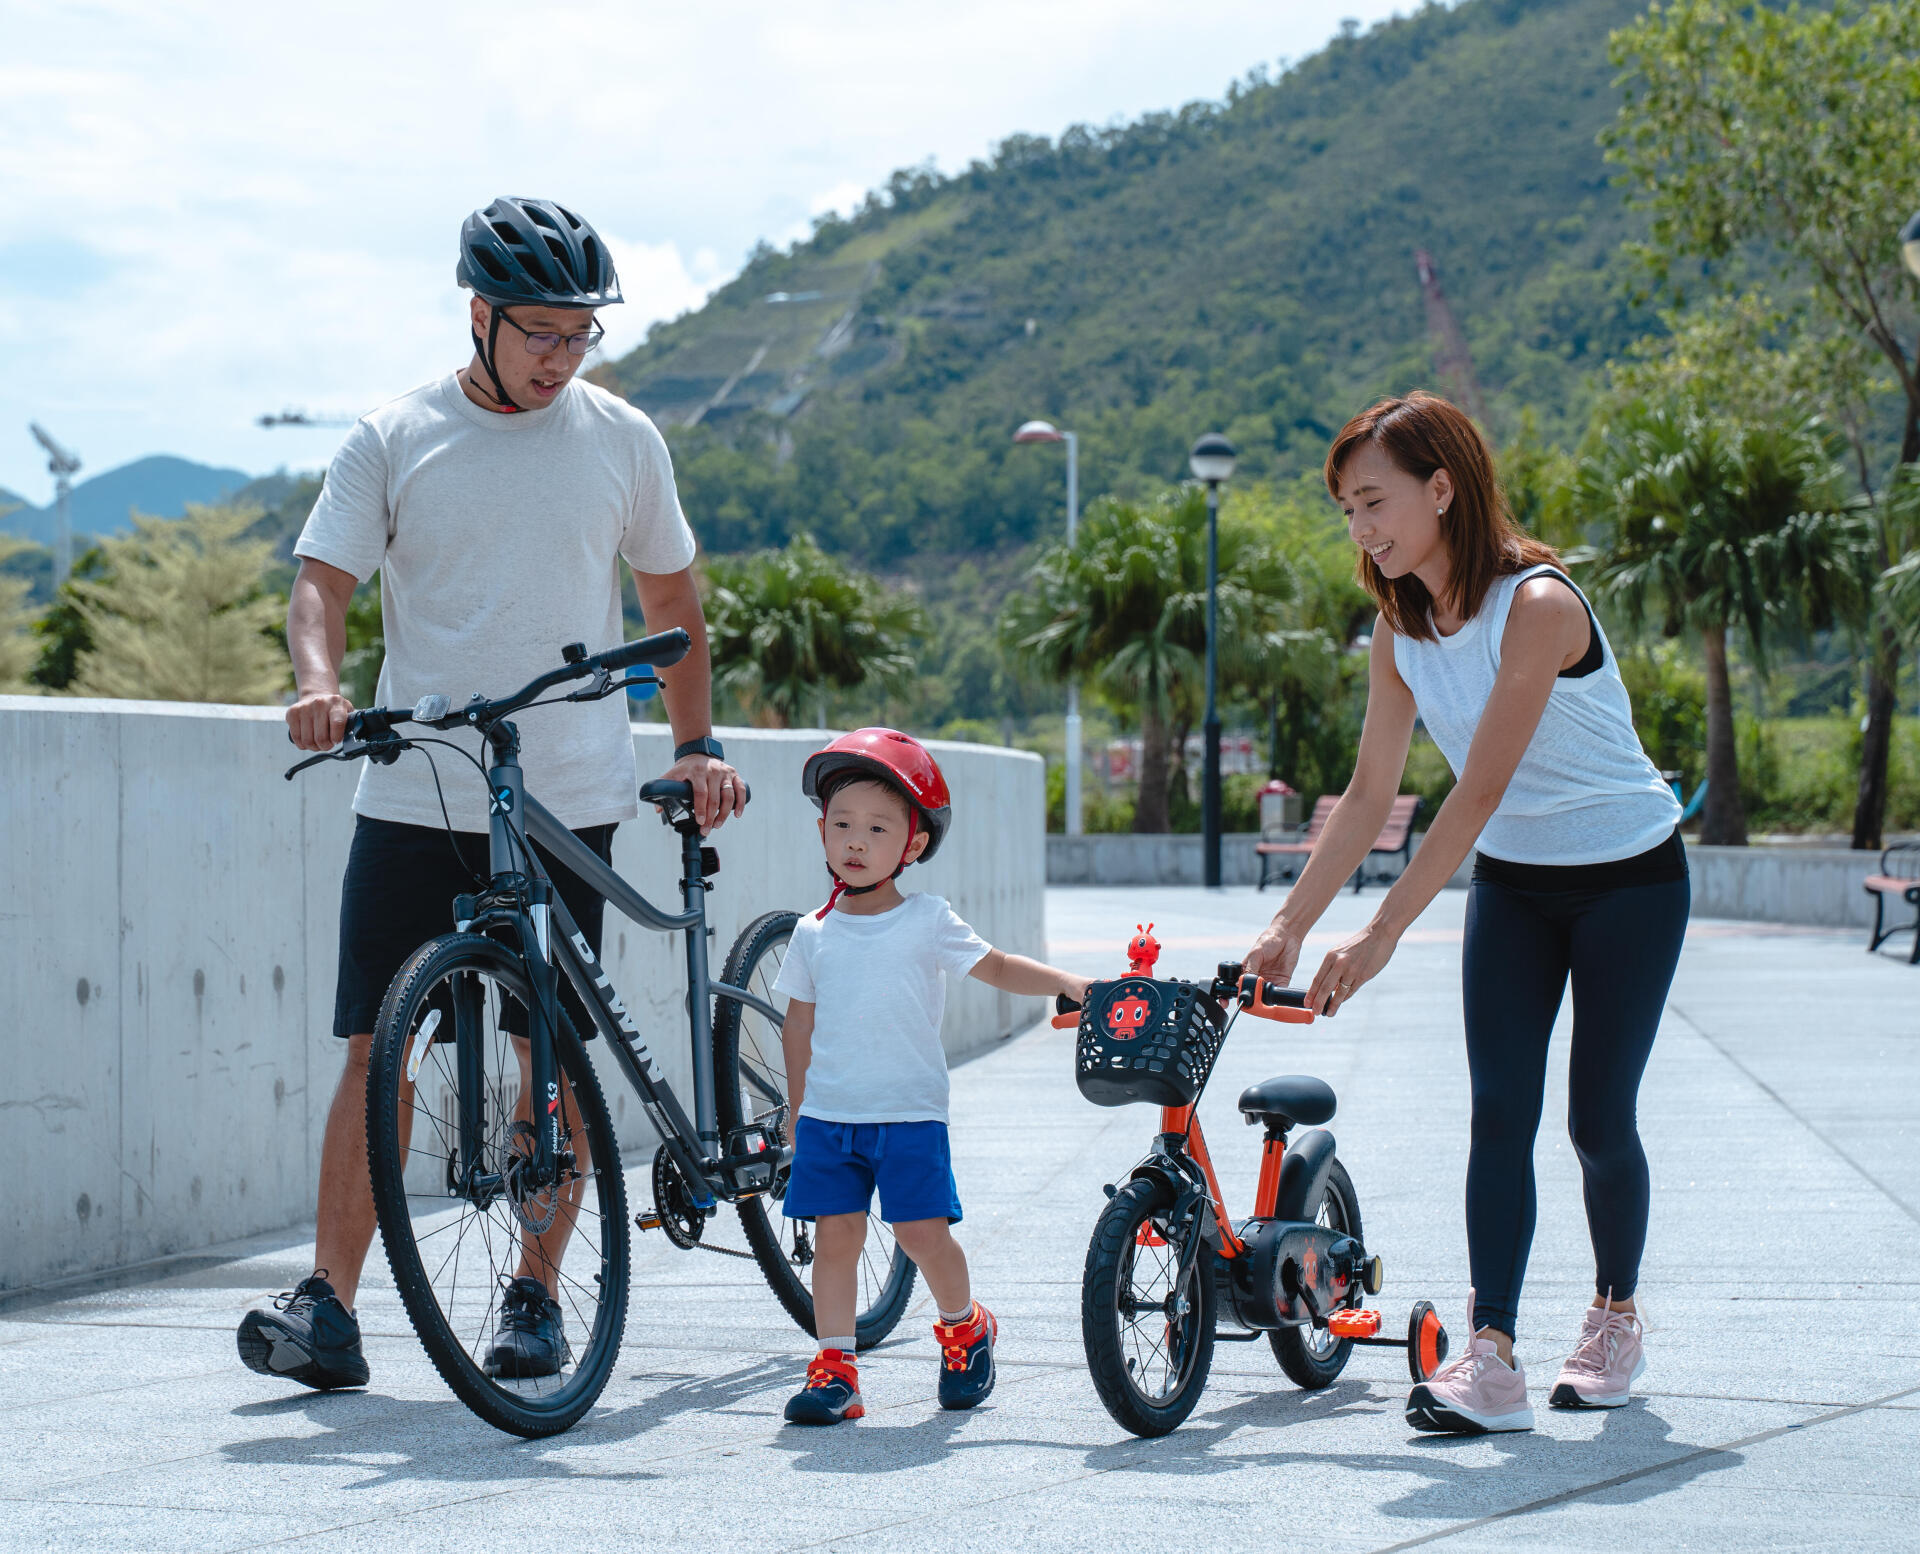 SELECT THE RIGHT BIKE AND RIDE WITH YOUR KID